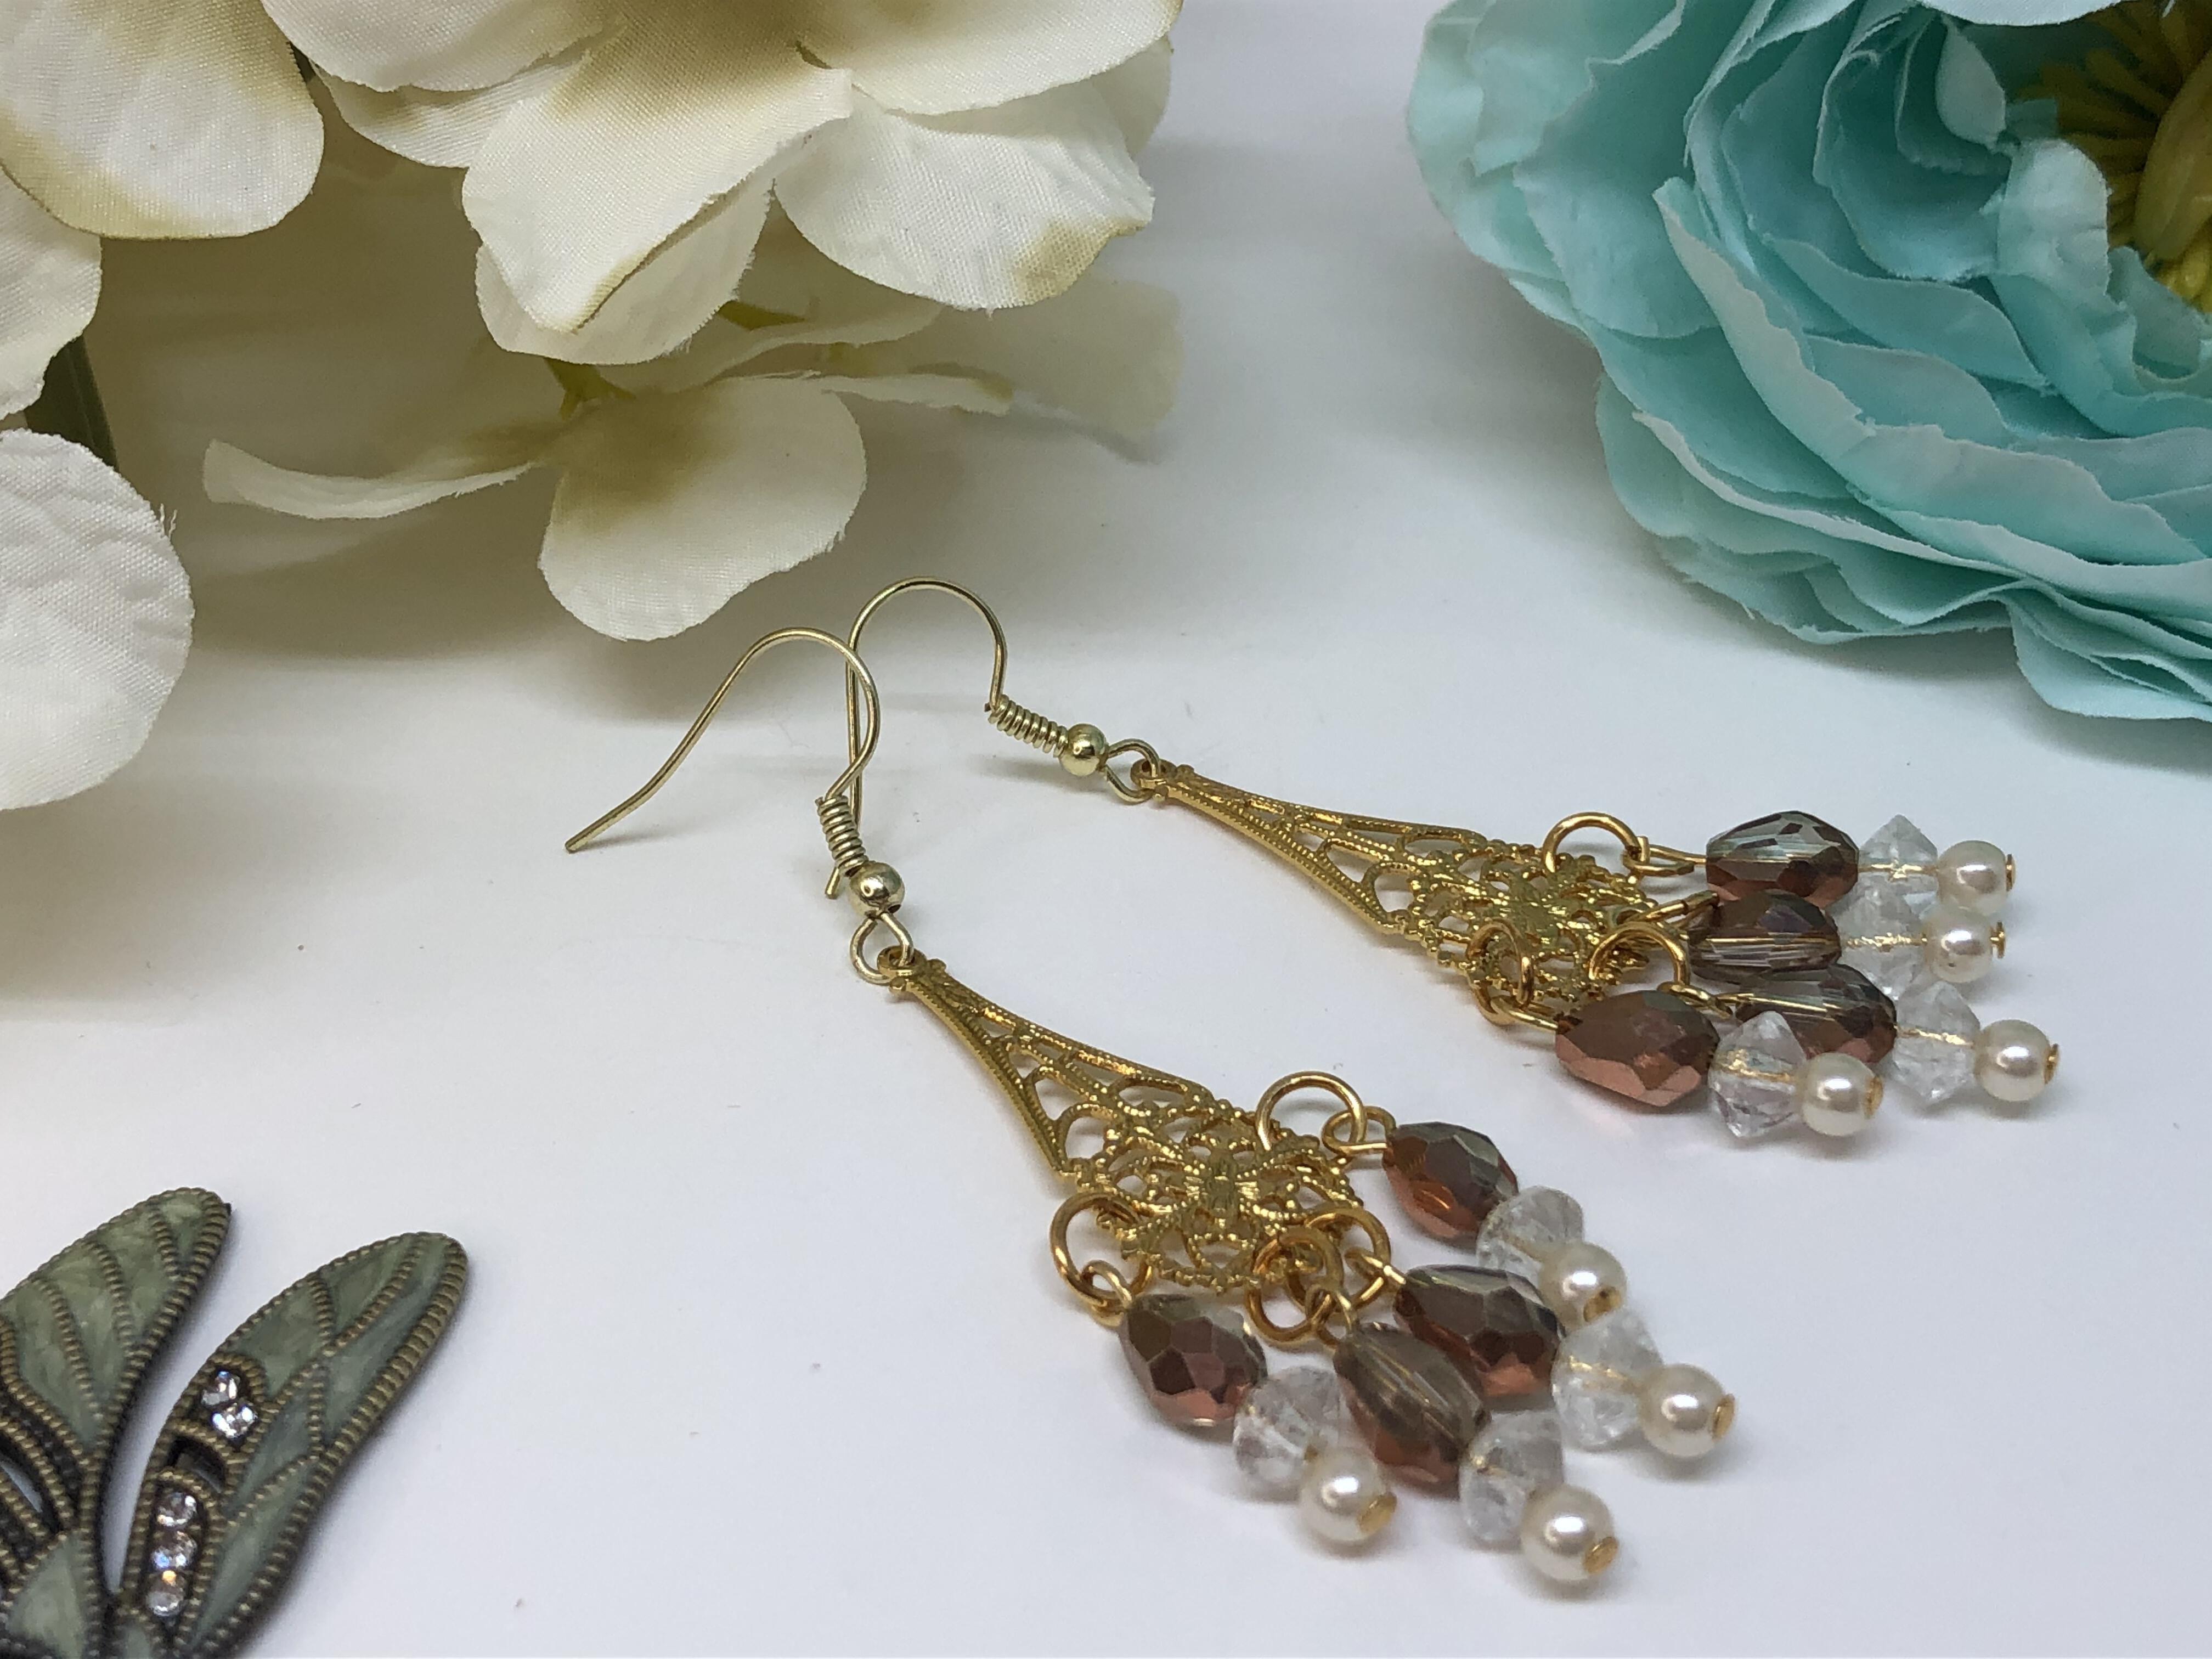 Handmade Teardrop Chandelier with Rose Gold Drops and Crystals Earrings